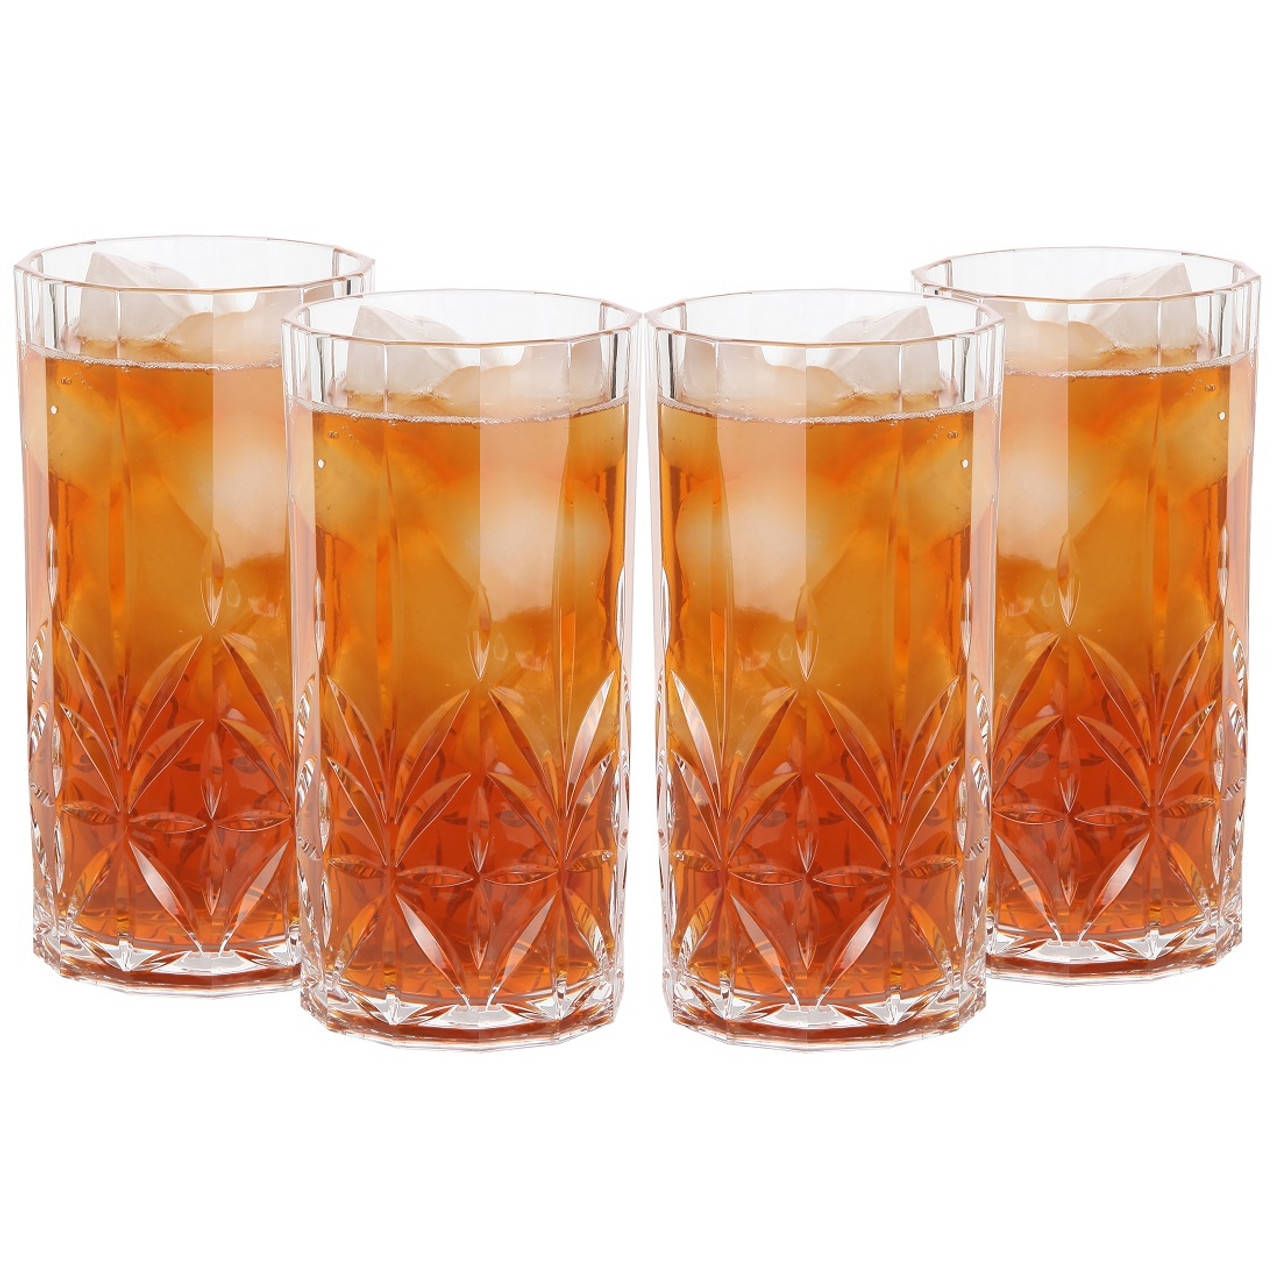 Lily's Home Unbreakable Poolside Acrylic Stemless Wine Glasses and Water  Tumblers, Made of Shatterproof Plastic and Ideal for Indoor and Outdoor  Use